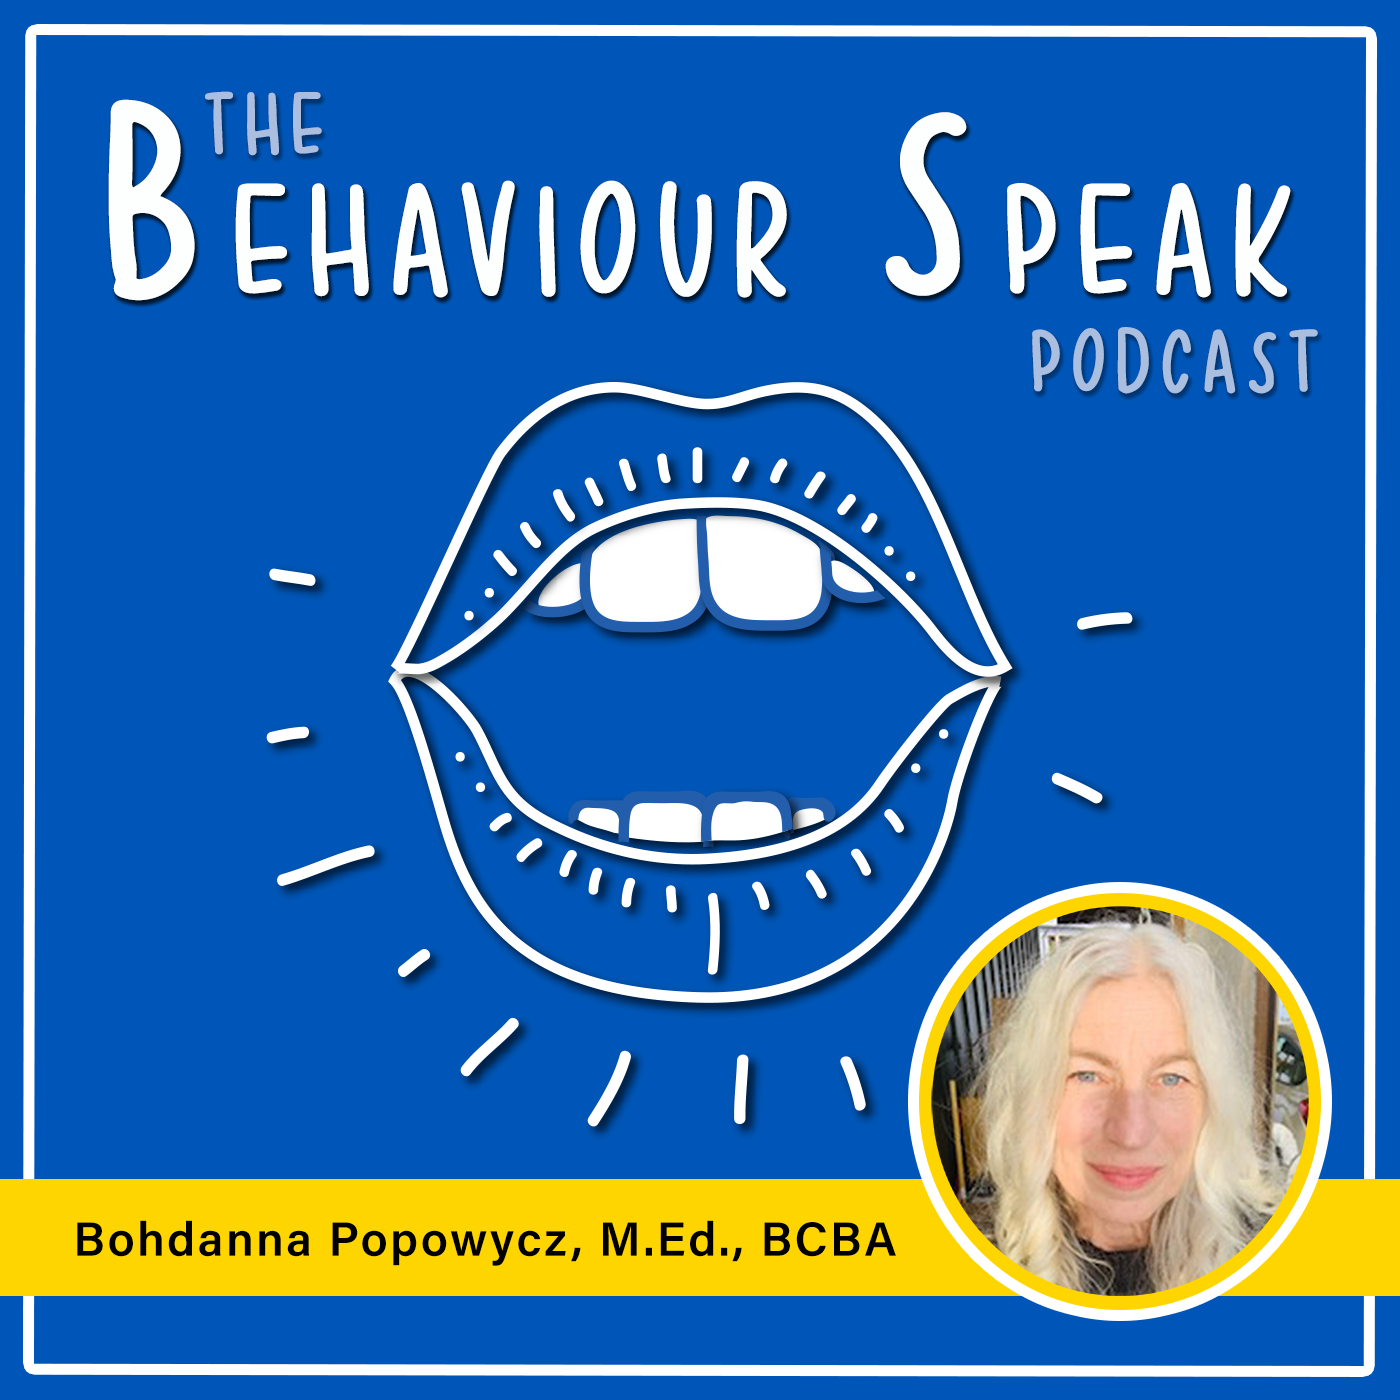 Episode 32: Special Series on Supporting Refugees from Ukraine Episode 2: Tips on Providing Direct Support to Ukrainian Refugee Families with Autistic Children with Bohdanna Popowycz, M.Ed., BCBA